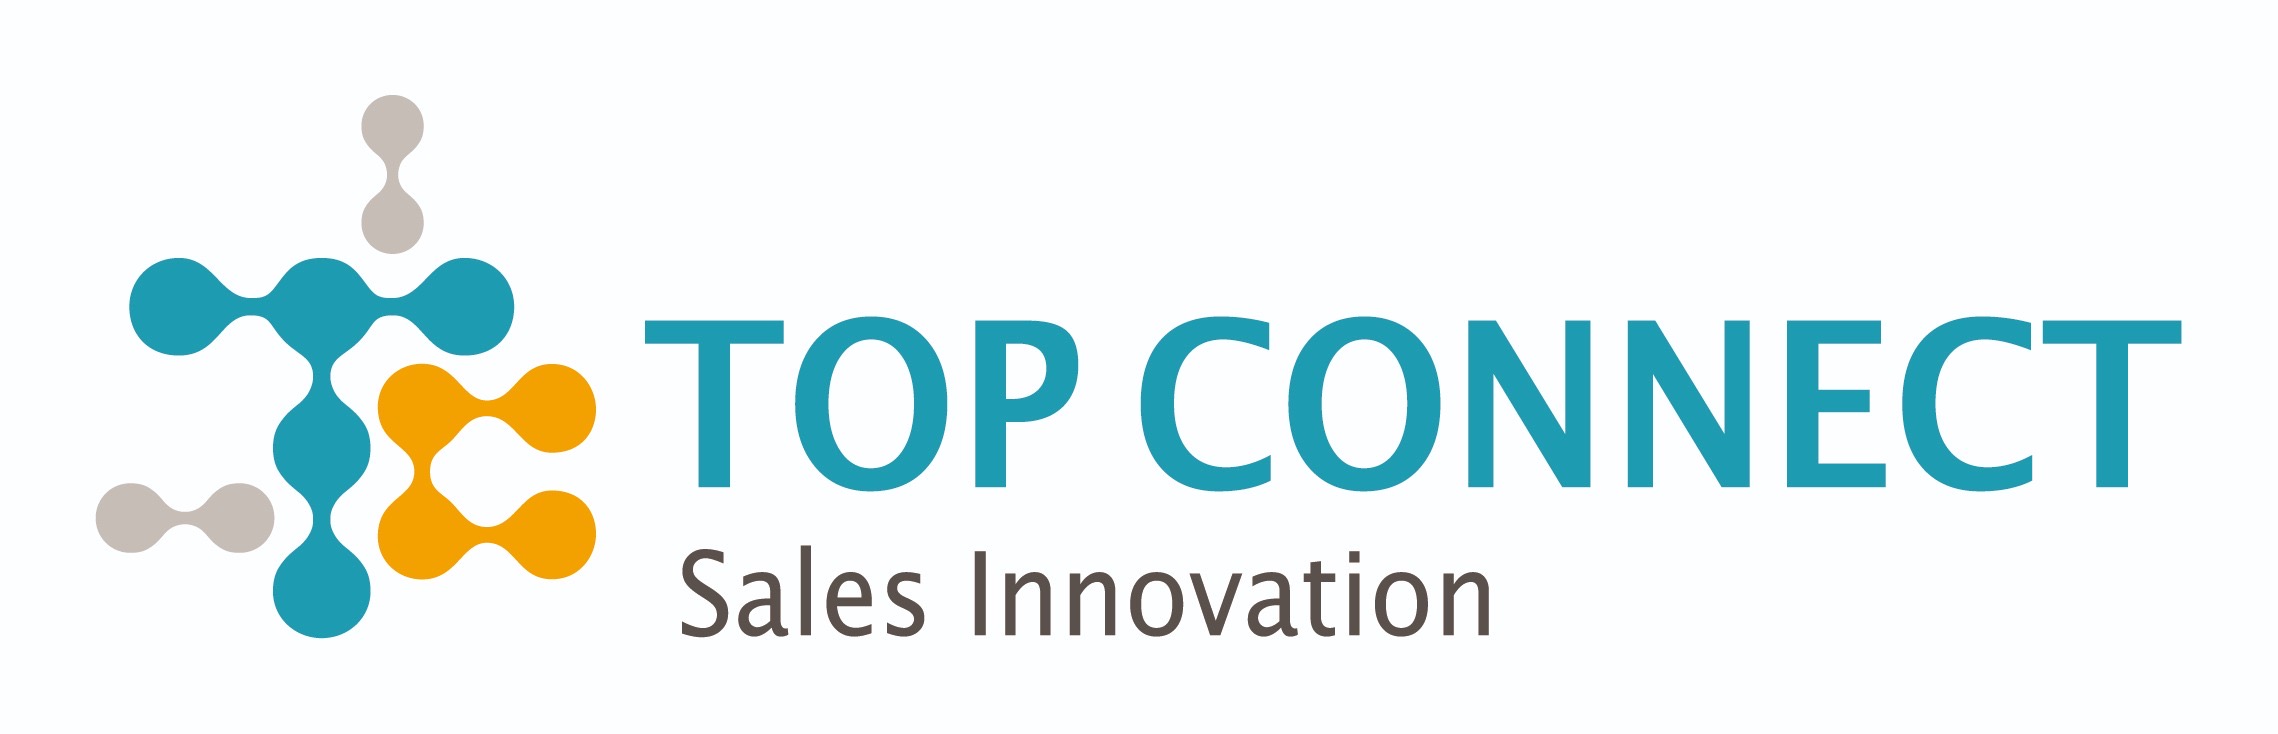 TOP CONNECT株式会社